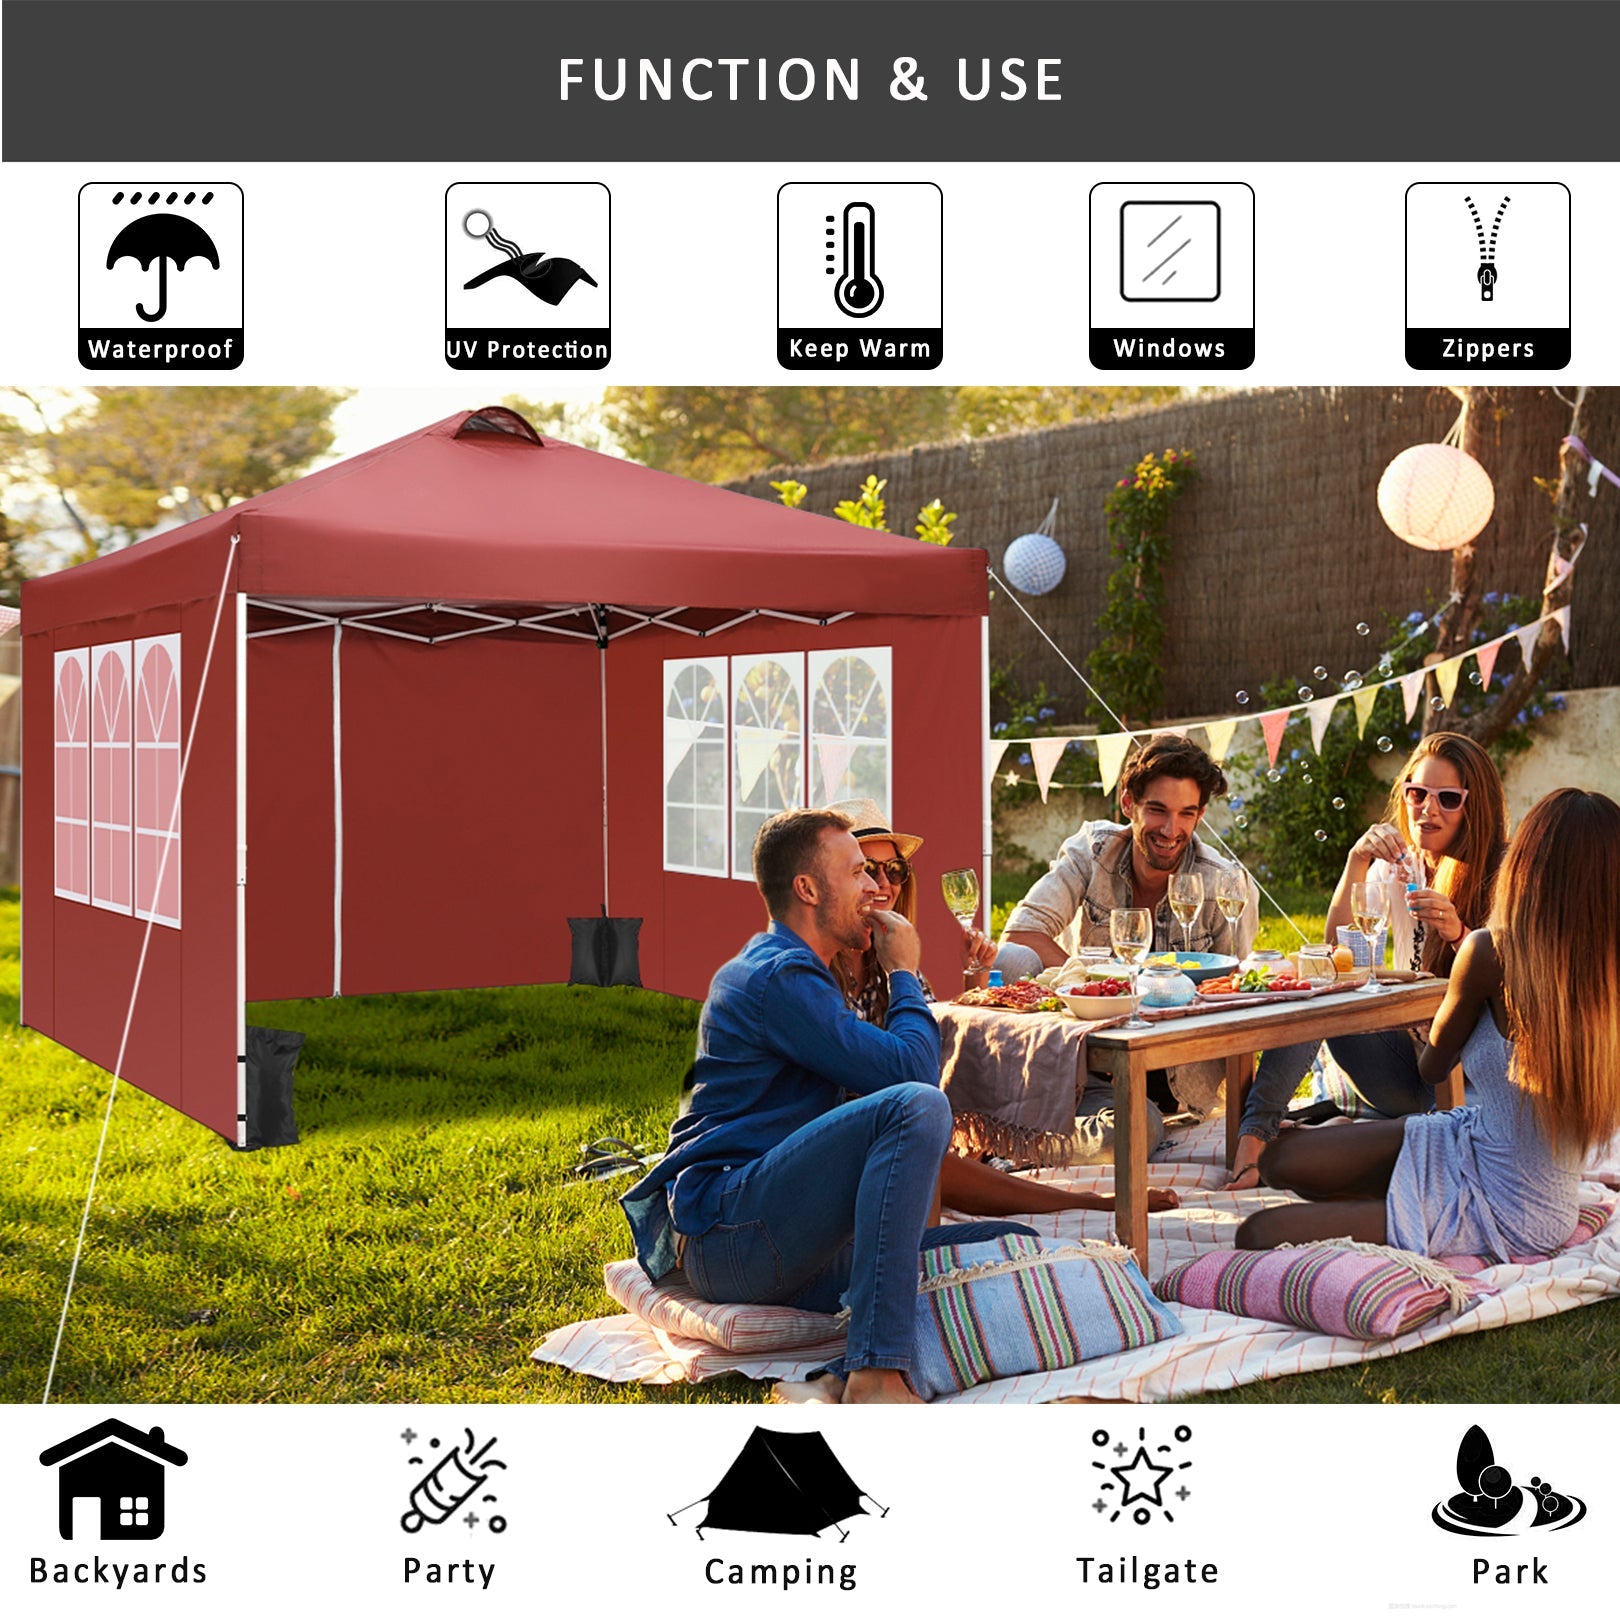 10' x 10' Straight Leg Pop-up Canopy Tent Easy One Person Setup Instant Outdoor Canopy Folding Shelter with 4 Removable Sidewalls, Air Vent on The Top, 4 Sandbags, Carrying Bag, Red